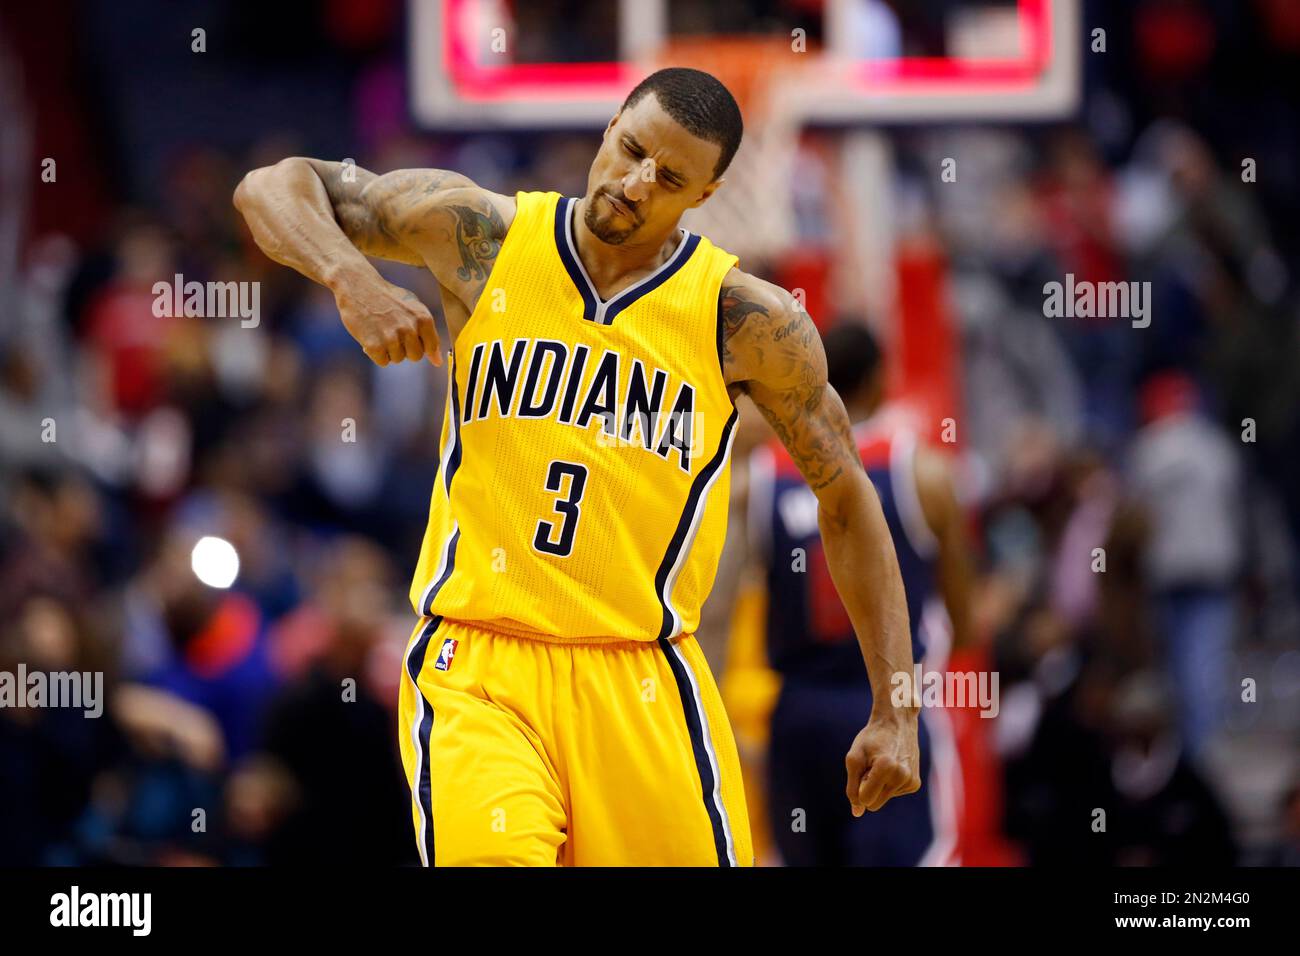 Indiana Pacers guard George Hill (3) celebrates after an NBA basketball game against the Washington Wizards, Wednesday, March 25, 2015, in Washington. Hill hit the game winning basket. The Pacers won 103-101. (AP Photo/Alex Brandon) Stock Photo